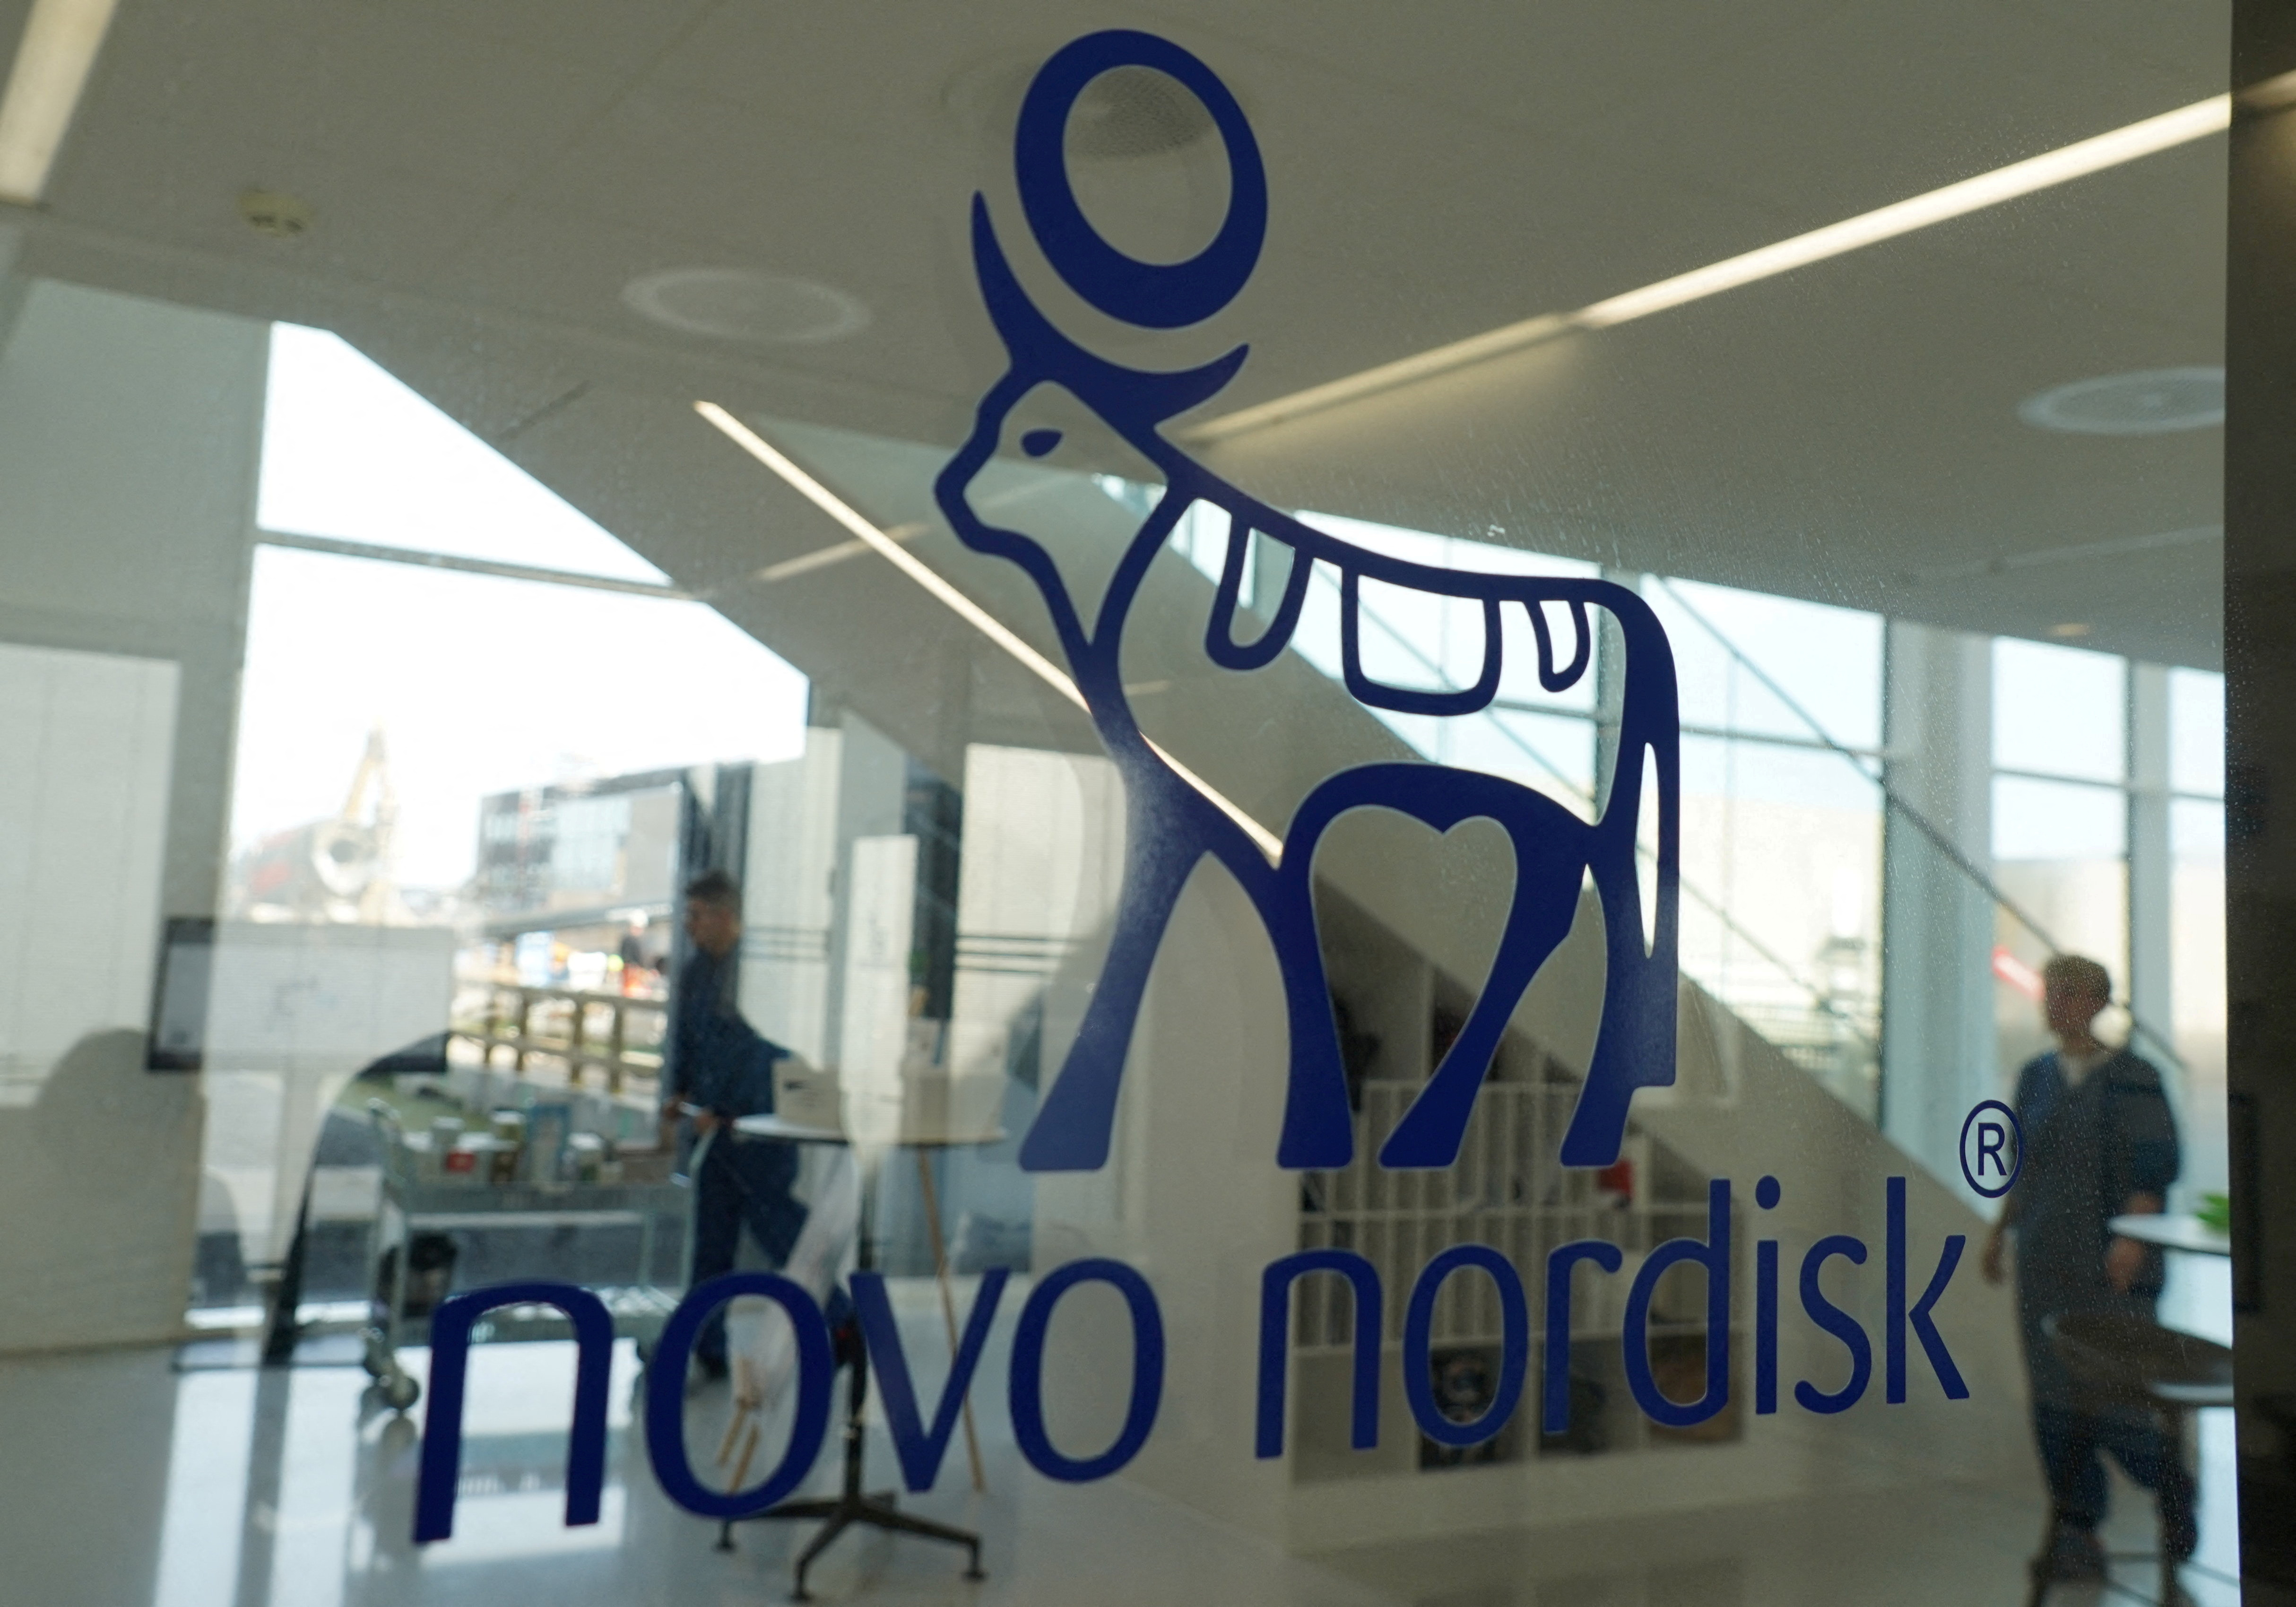 Novo Nordisk logo above the entrance to their offices in Hillerod